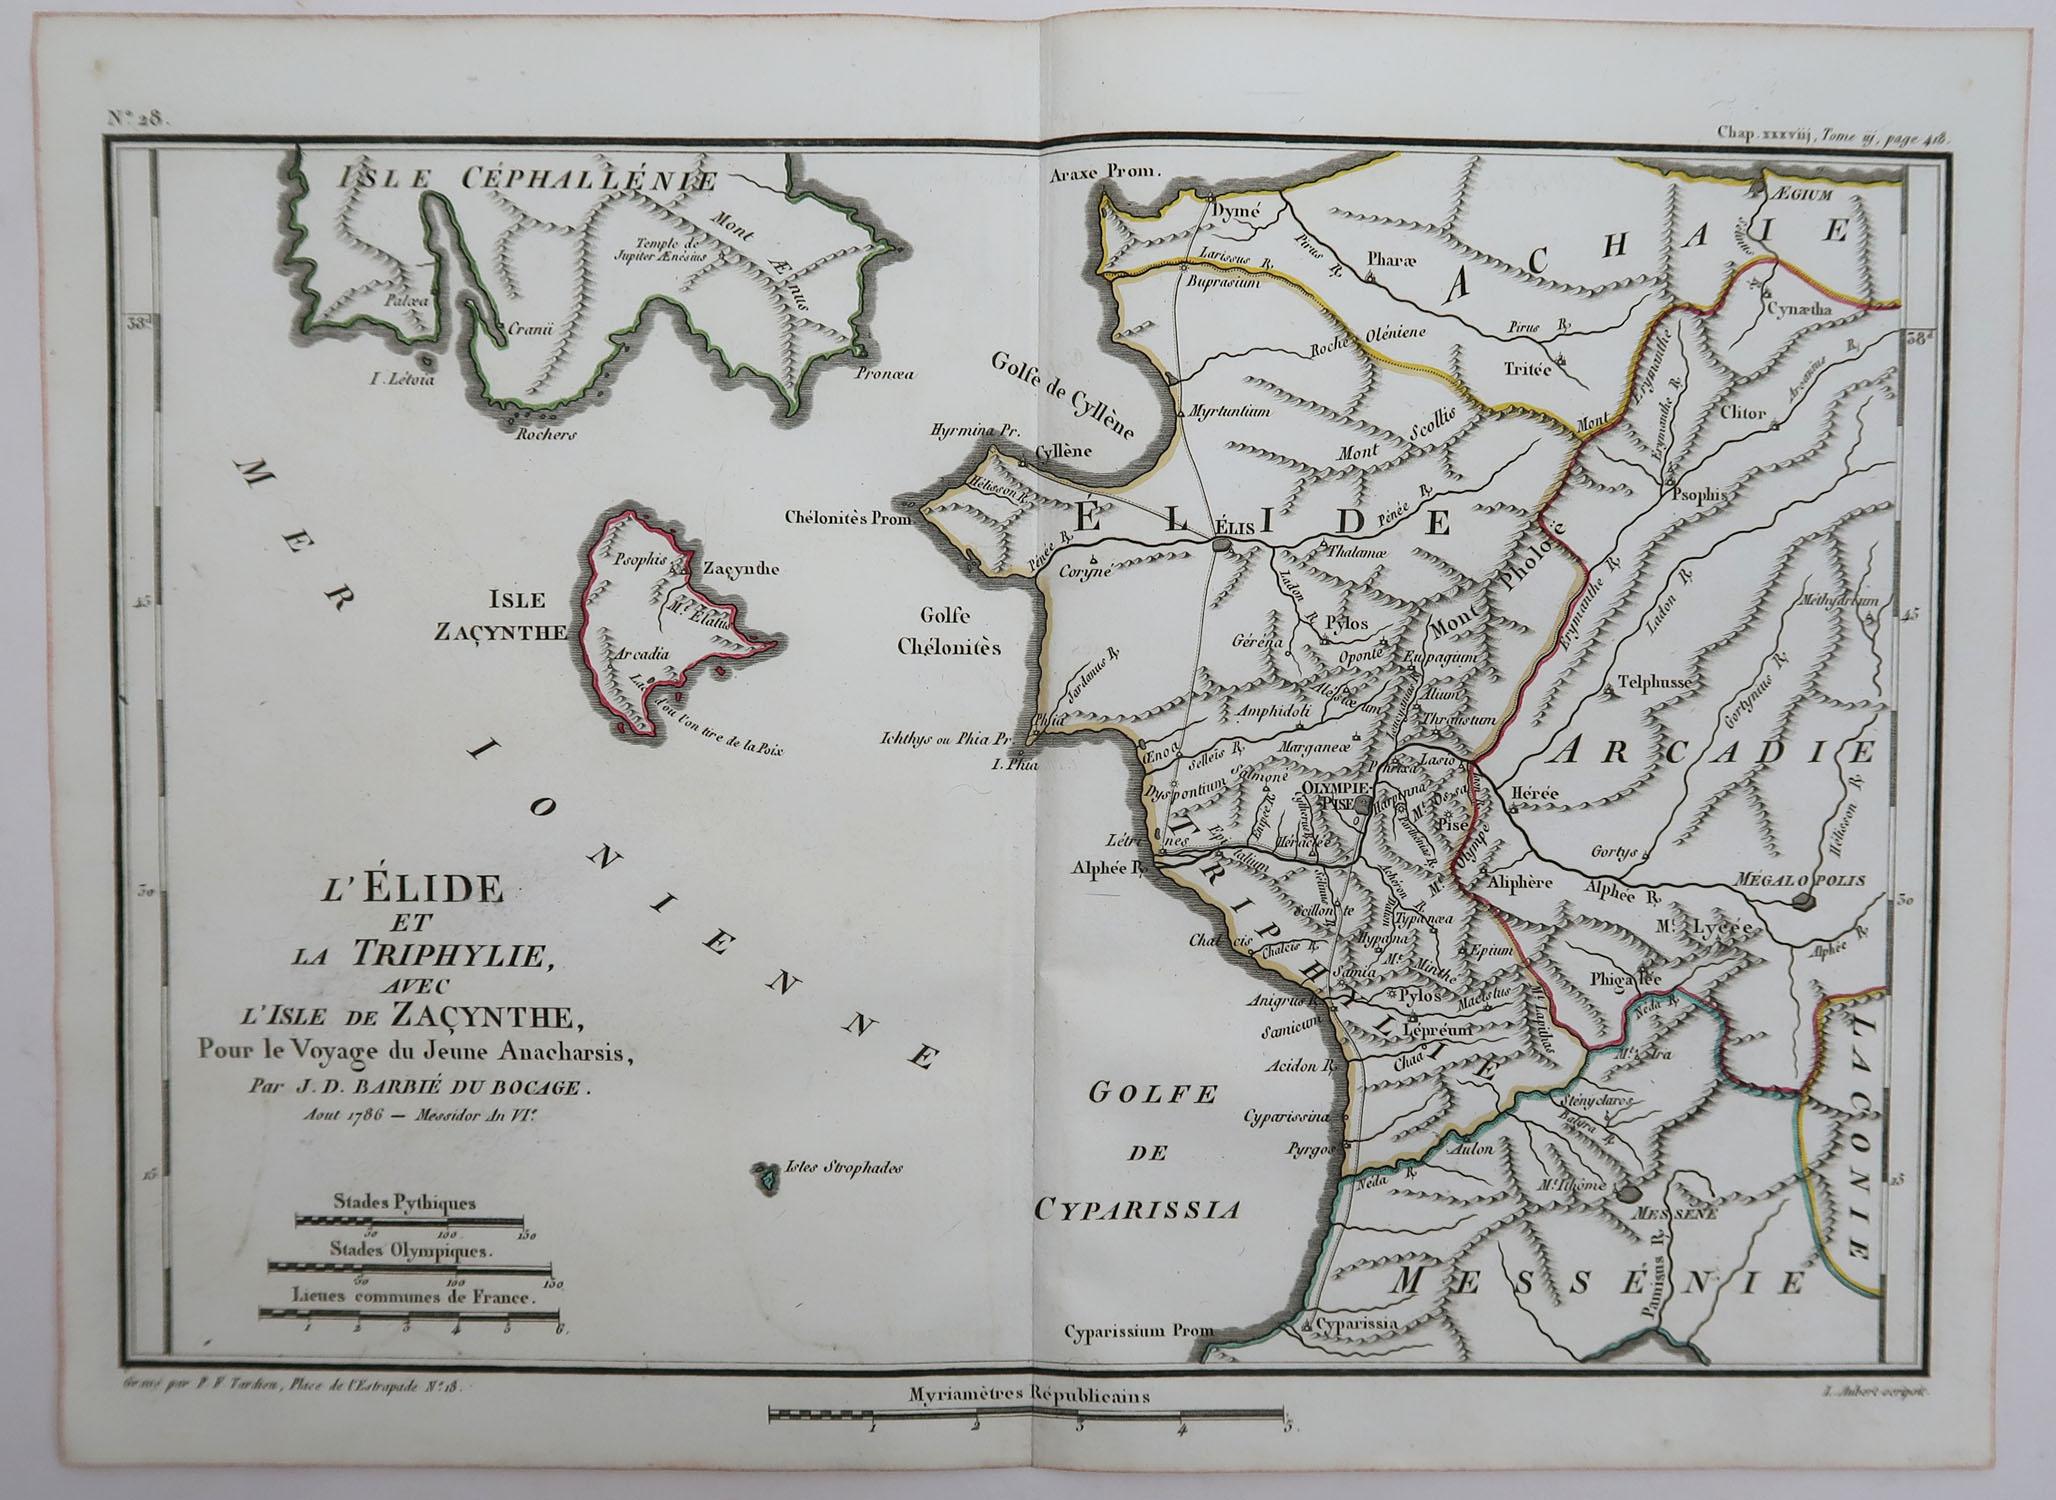 Other Original Antique Map of Ancient Greece, Elis, Island of Zakynthos, 1786